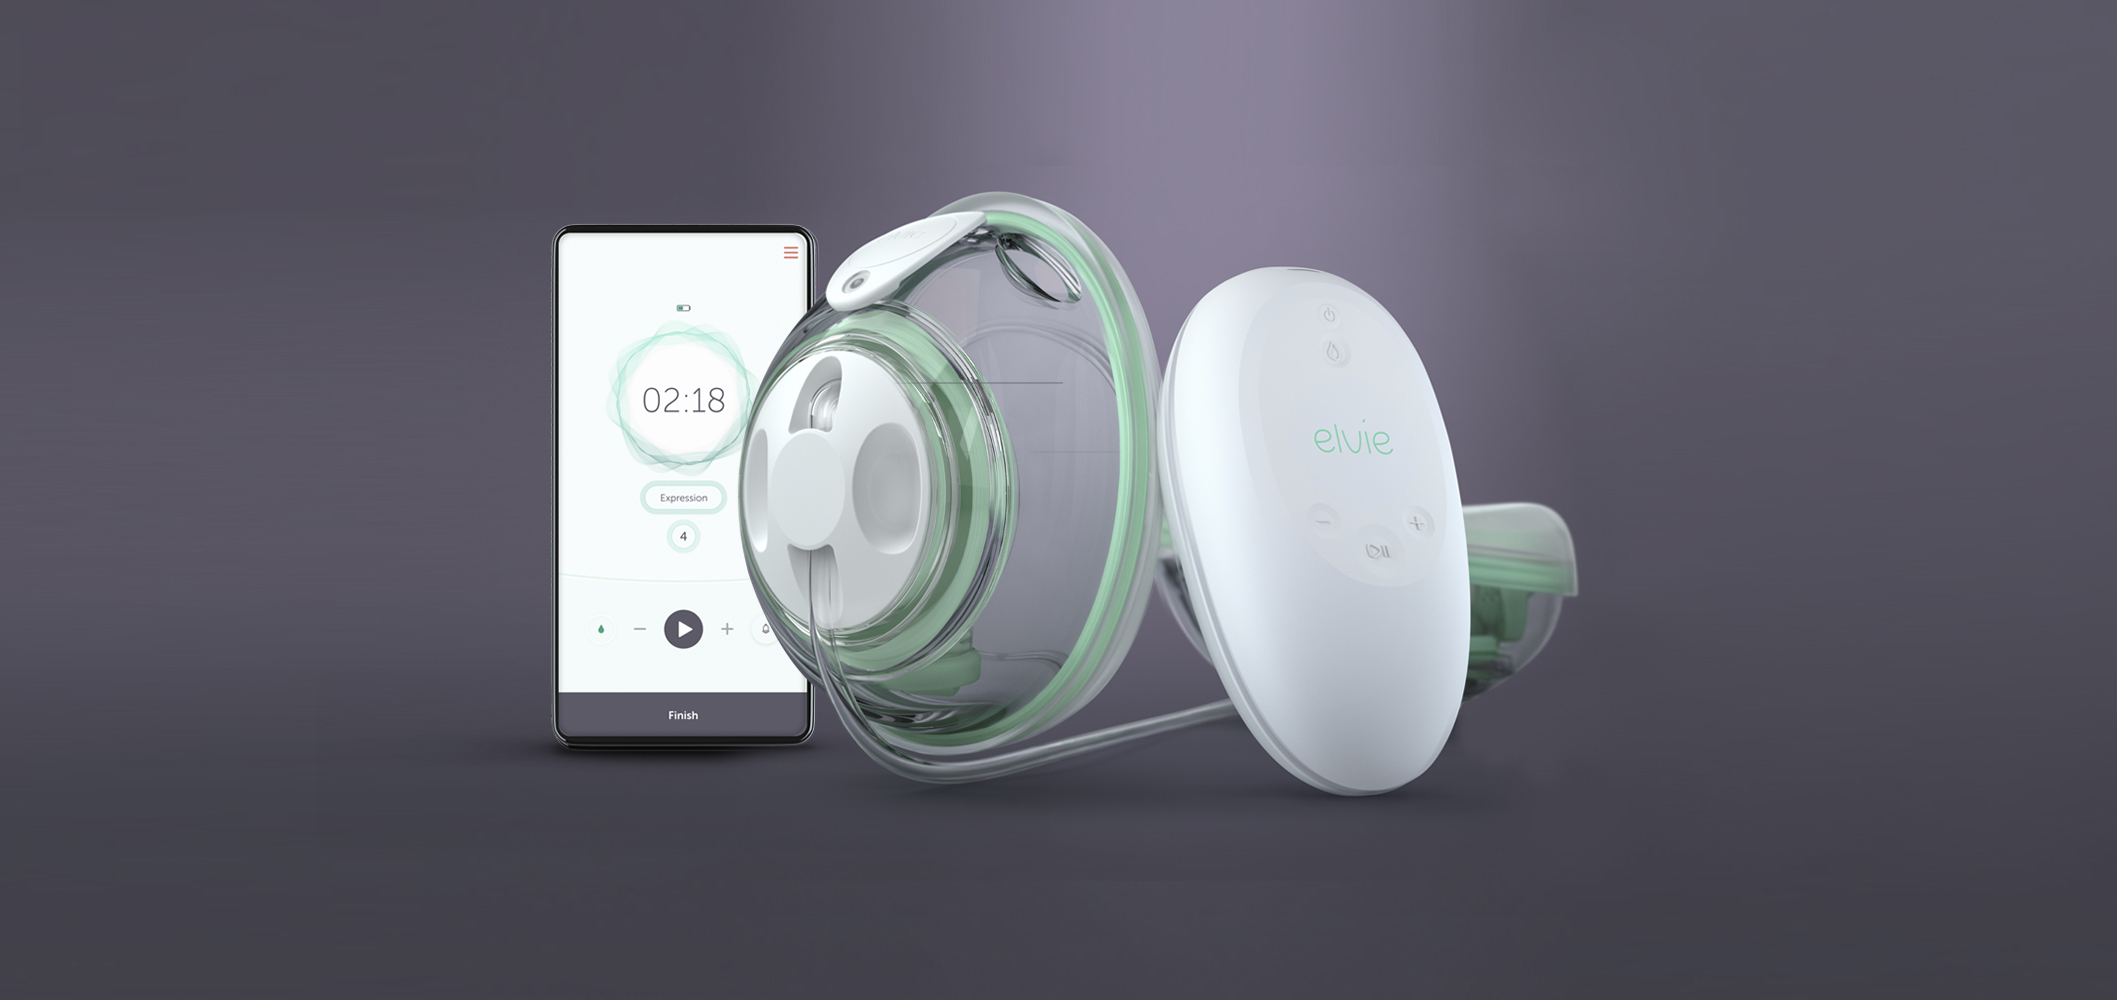 Elvie Launches New Smart Breast Pump In The Us Covered By Insurance - Medical Device News By Guided Solutions